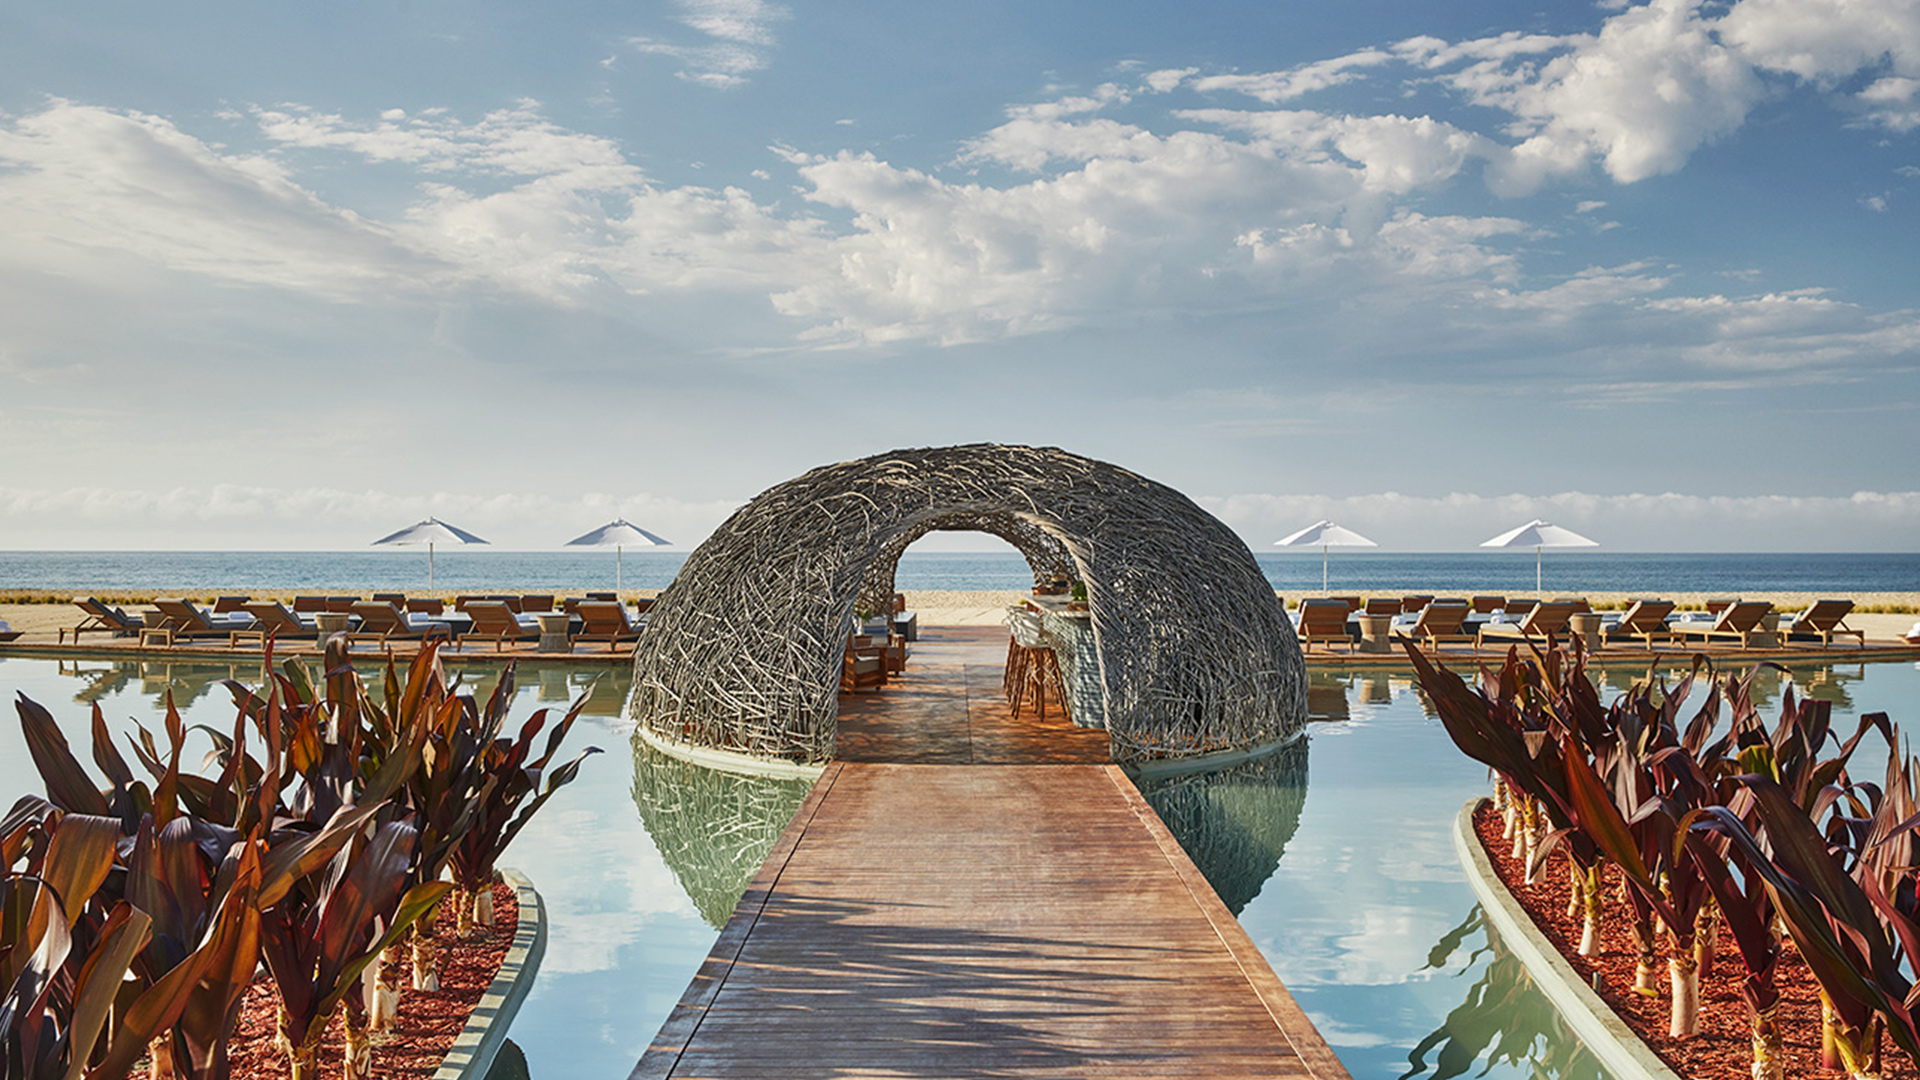 Viceroy Los Cabos' spa, one of the most luxurious resorts in Mexico - Luxury Escapes